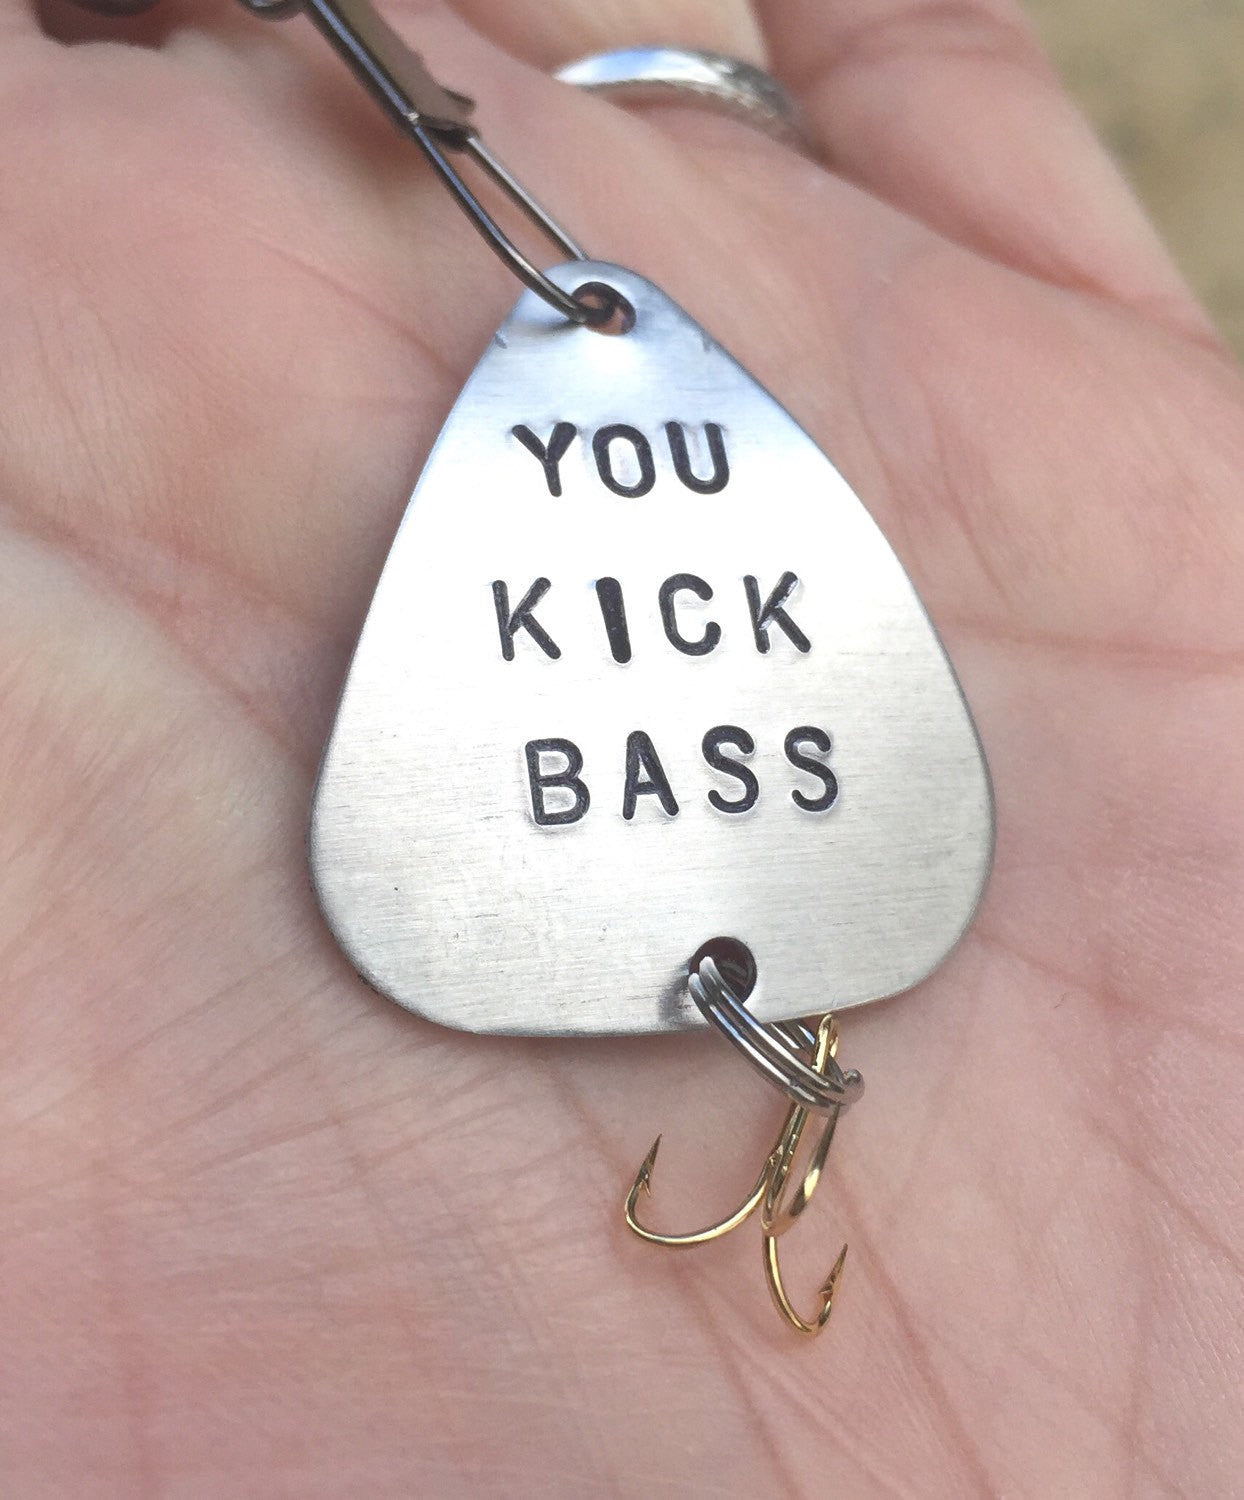 Fishing Lure,Fathers Day Gift, You Kick Bass, For Him, Boyfriend Gift, Personalized Fishing Lure, Hand Stamped Fishing Lure,natashaaloha - Natashaaloha, jewelry, bracelets, necklace, keychains, fishing lures, gifts for men, charms, personalized, 